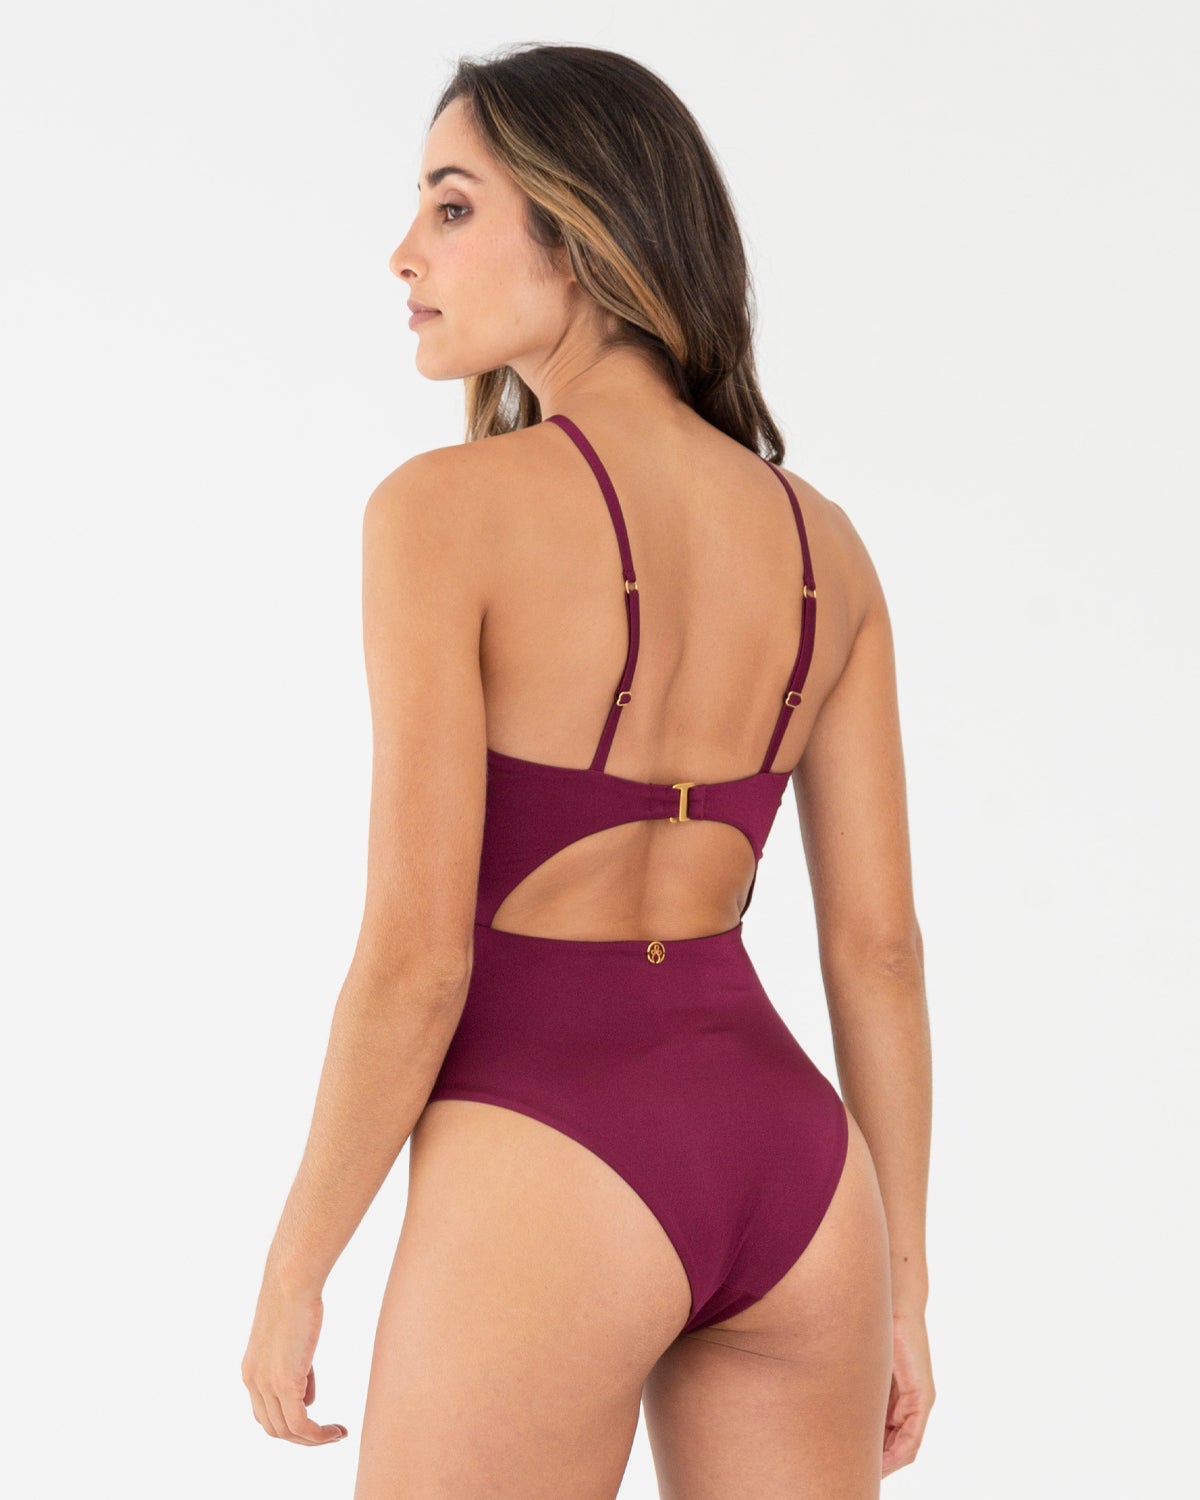 Wine colored one piece with cutout back and adjustable straps.